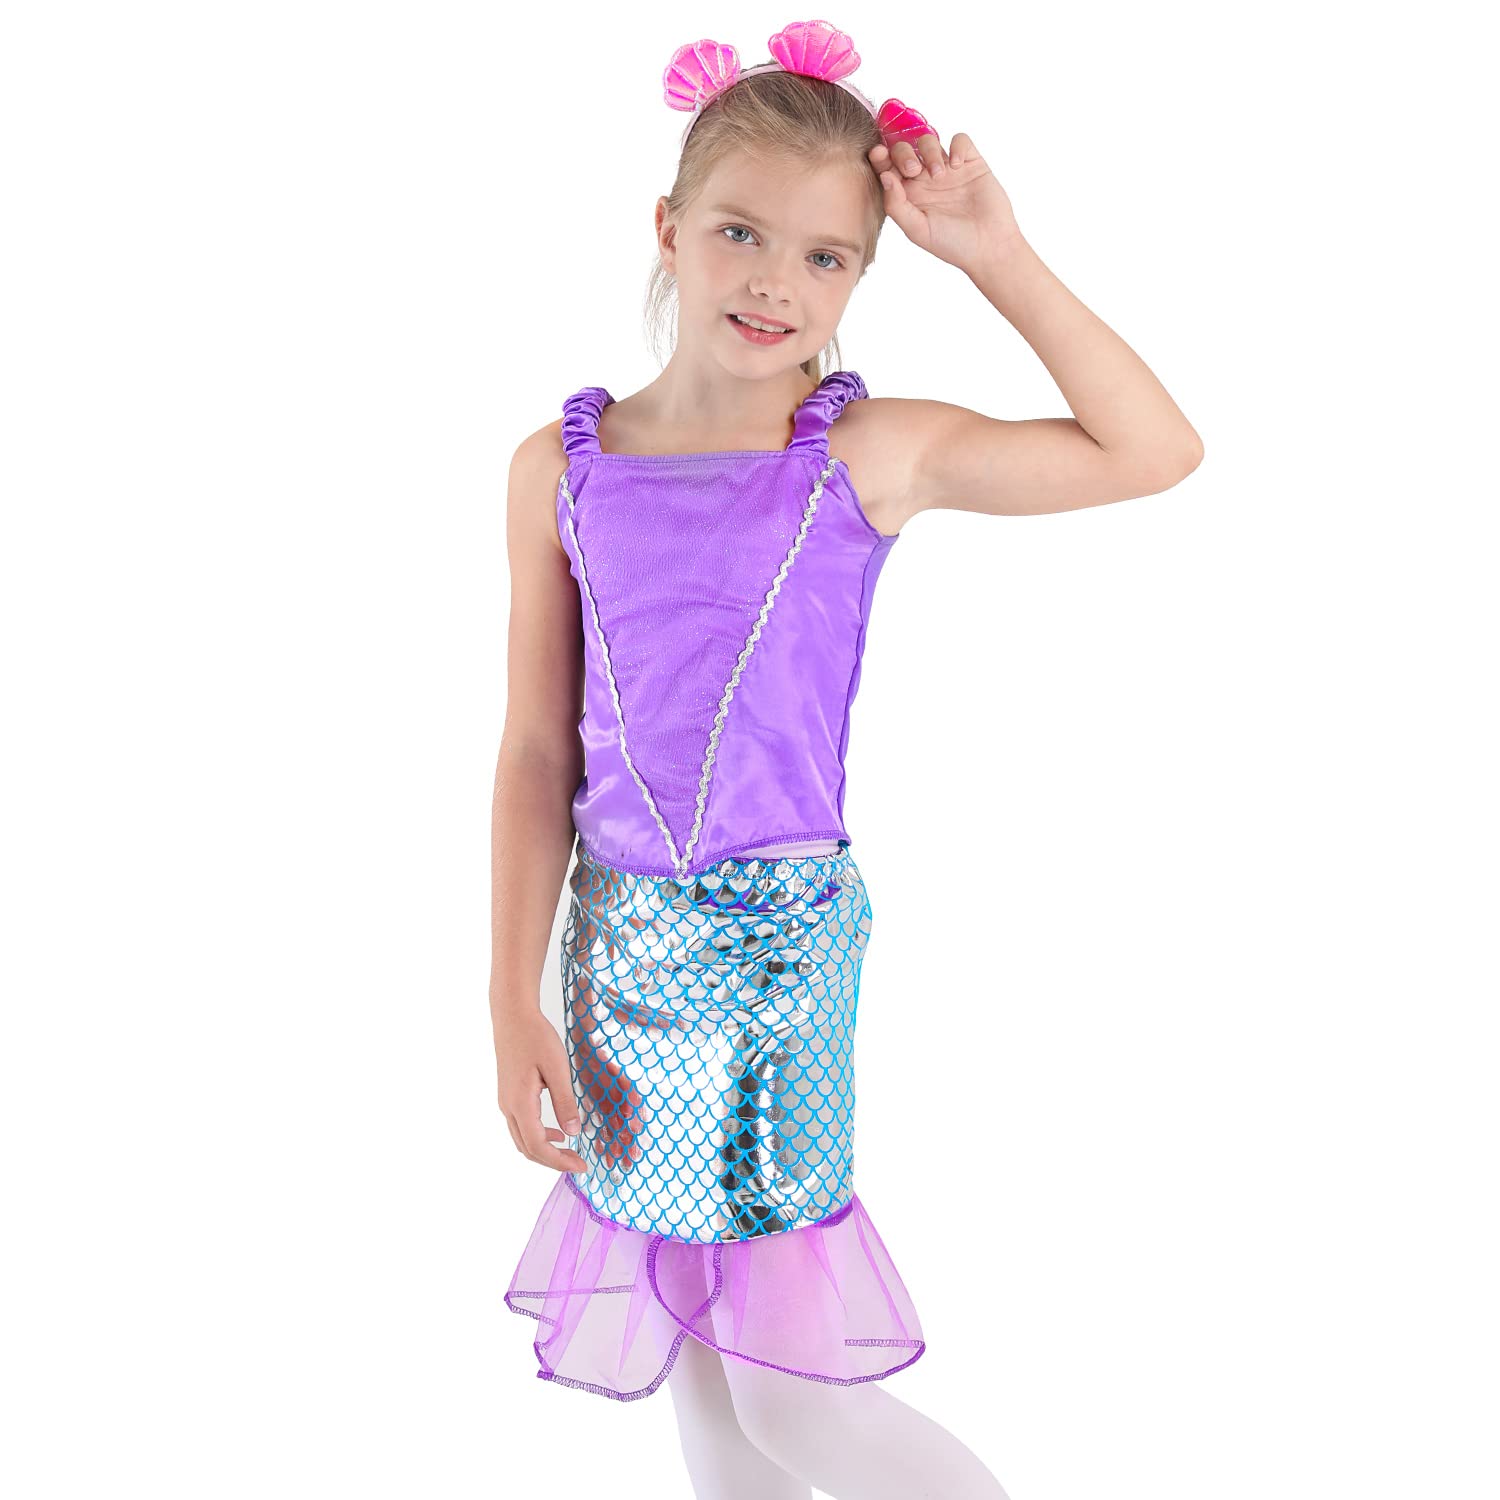 Toiijoy Girls Dress up Costume Set Princess,Fairy,Mermaid,Bride,Pop Star Costume for Little Girls Toddler Ages 3-6yrs